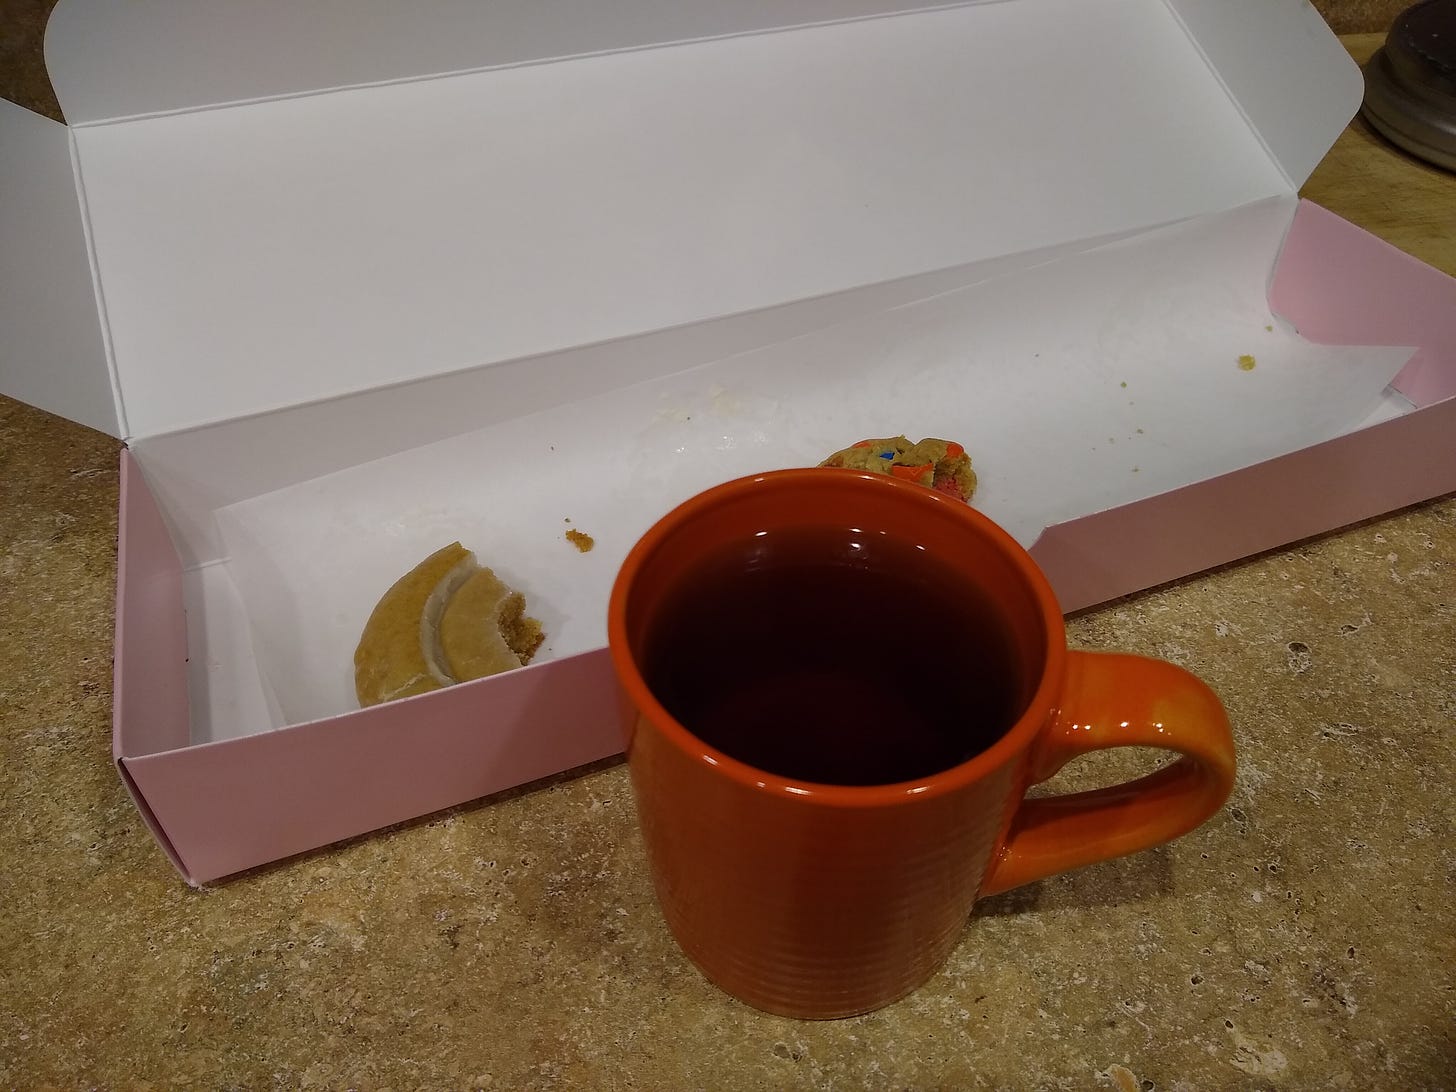 Mug of apple cider and a mostly empty box of Crumbl cookies.